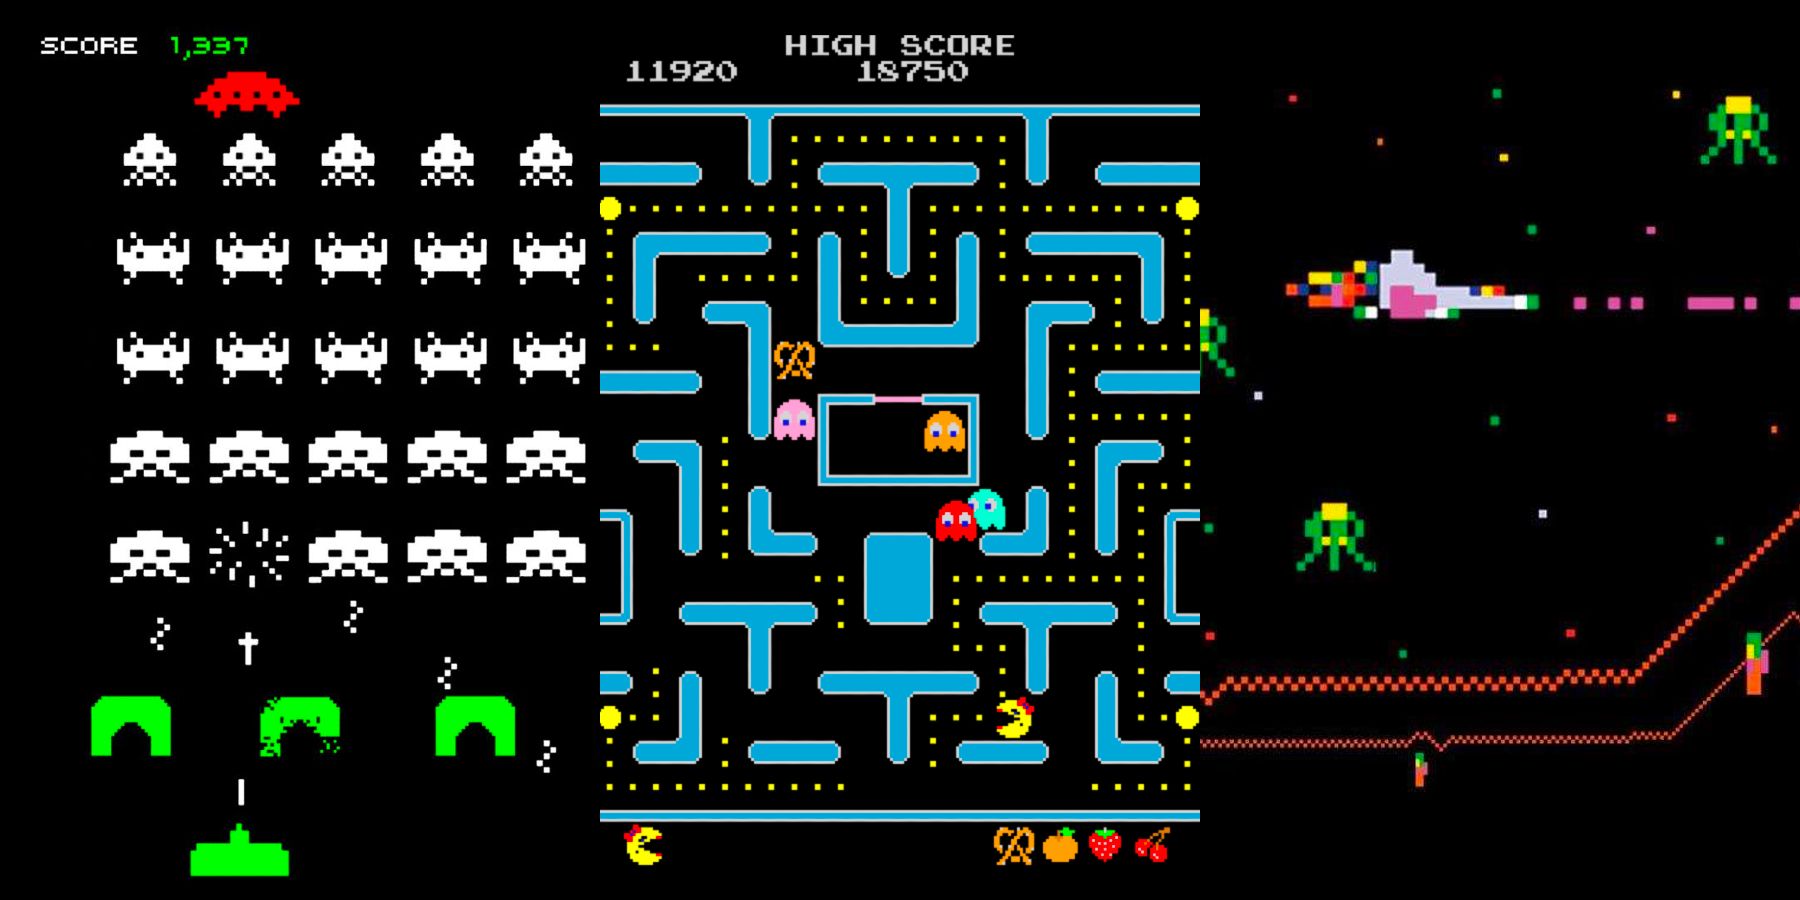 Split image showing gameplay screenshots from Space Invaders, Ms. Pac-Man, and Defender.